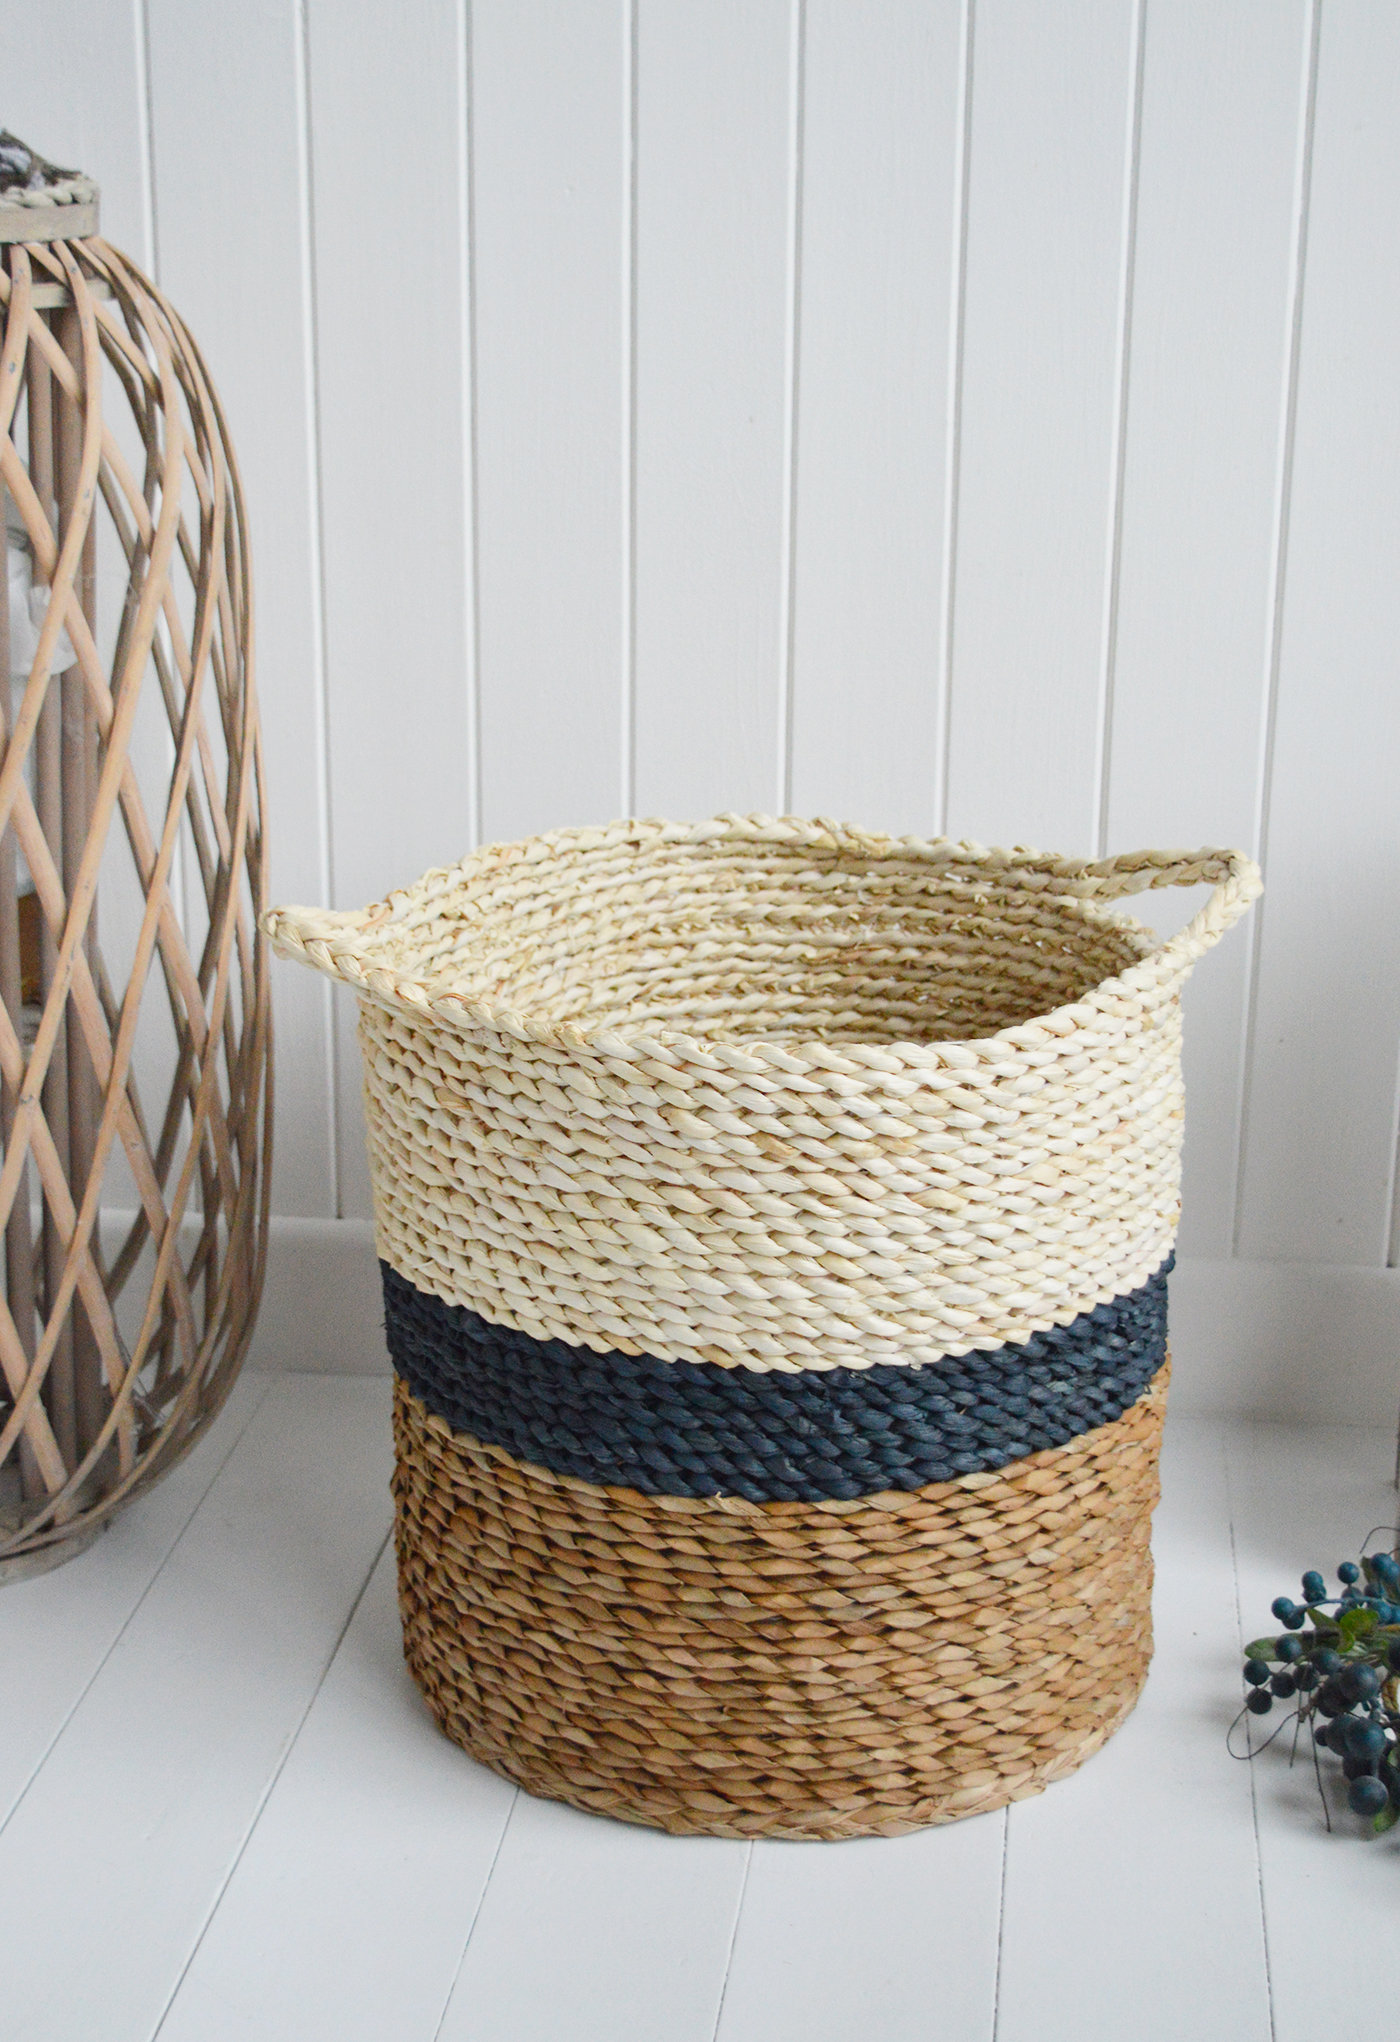 Southampton basket handles for logs, toys and everyday storage from The White Lighthouse Furniture and Home Interiors for New England, country, coastal and city homes for hallway, living room, bedroom and bathroom